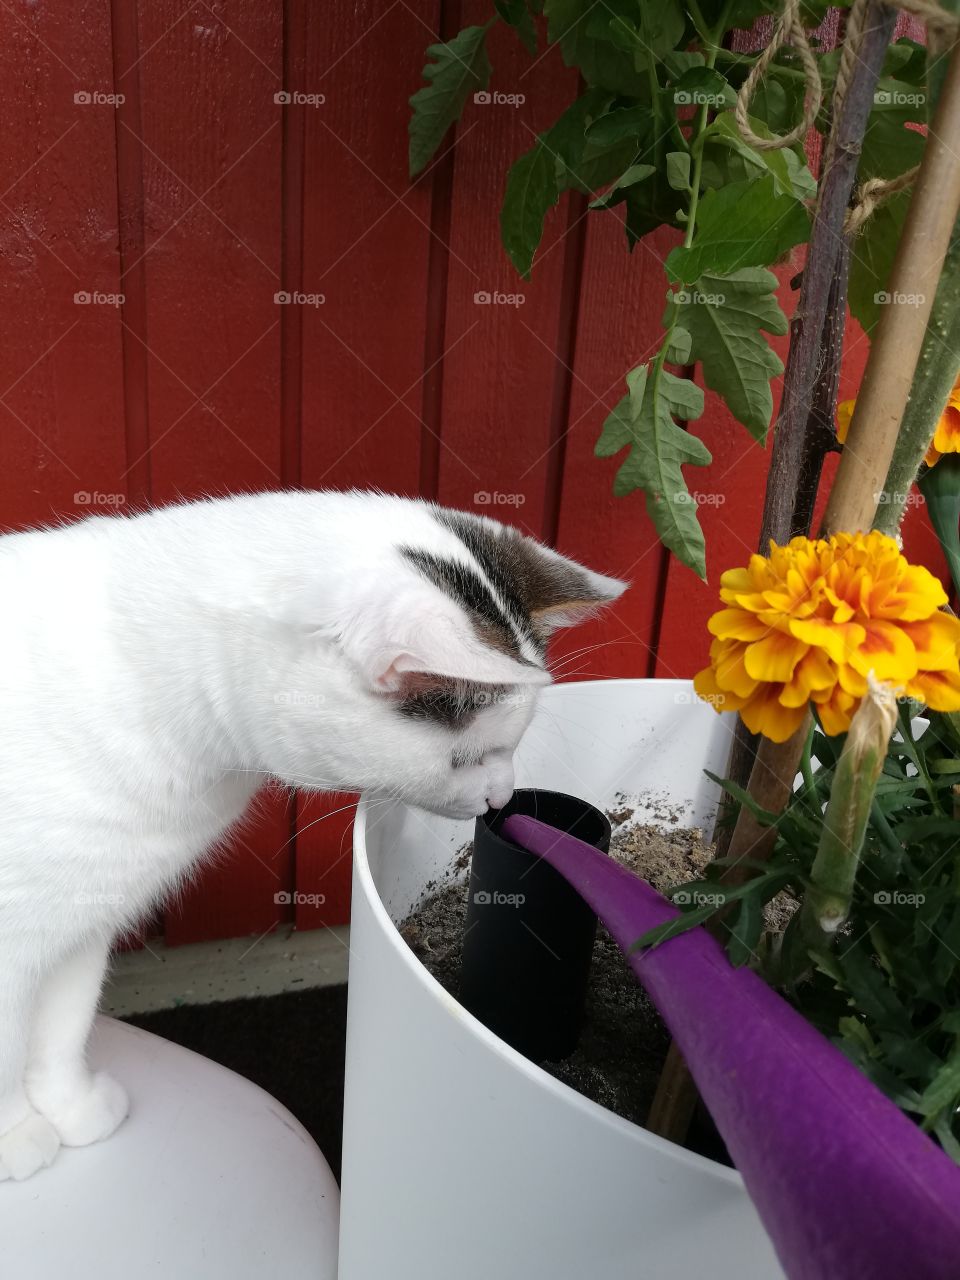 A kitten sniffing a violet pitcher and a black tube. A tomato and an orange marigold in the soil in the jar. Background a red wall.